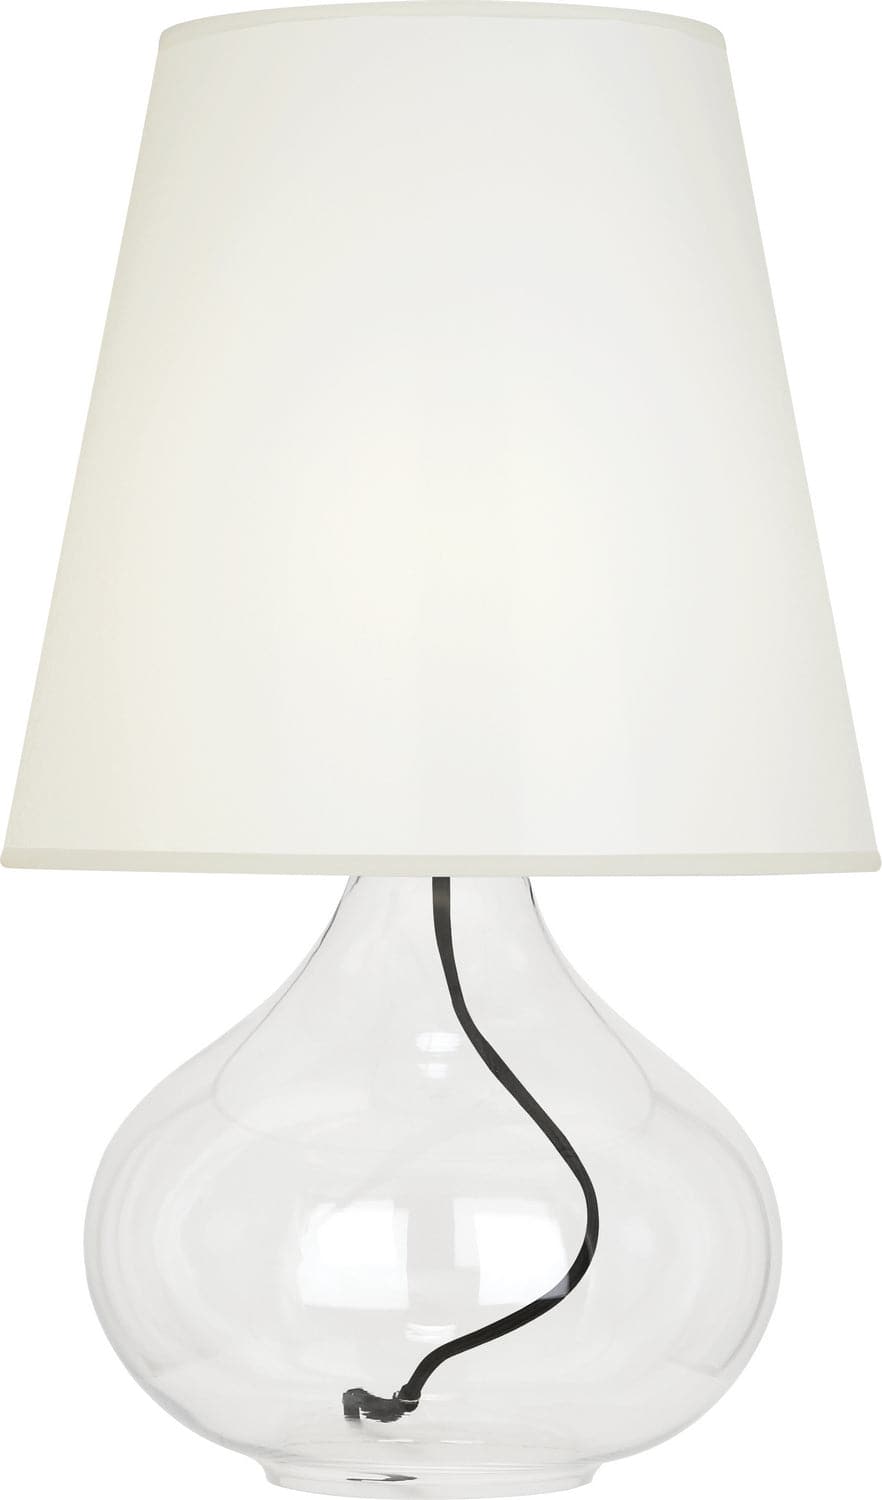 Robert Abbey - 458W - One Light Table Lamp - June - Clear Glass Body w/Black Fabric Wrapped Cord